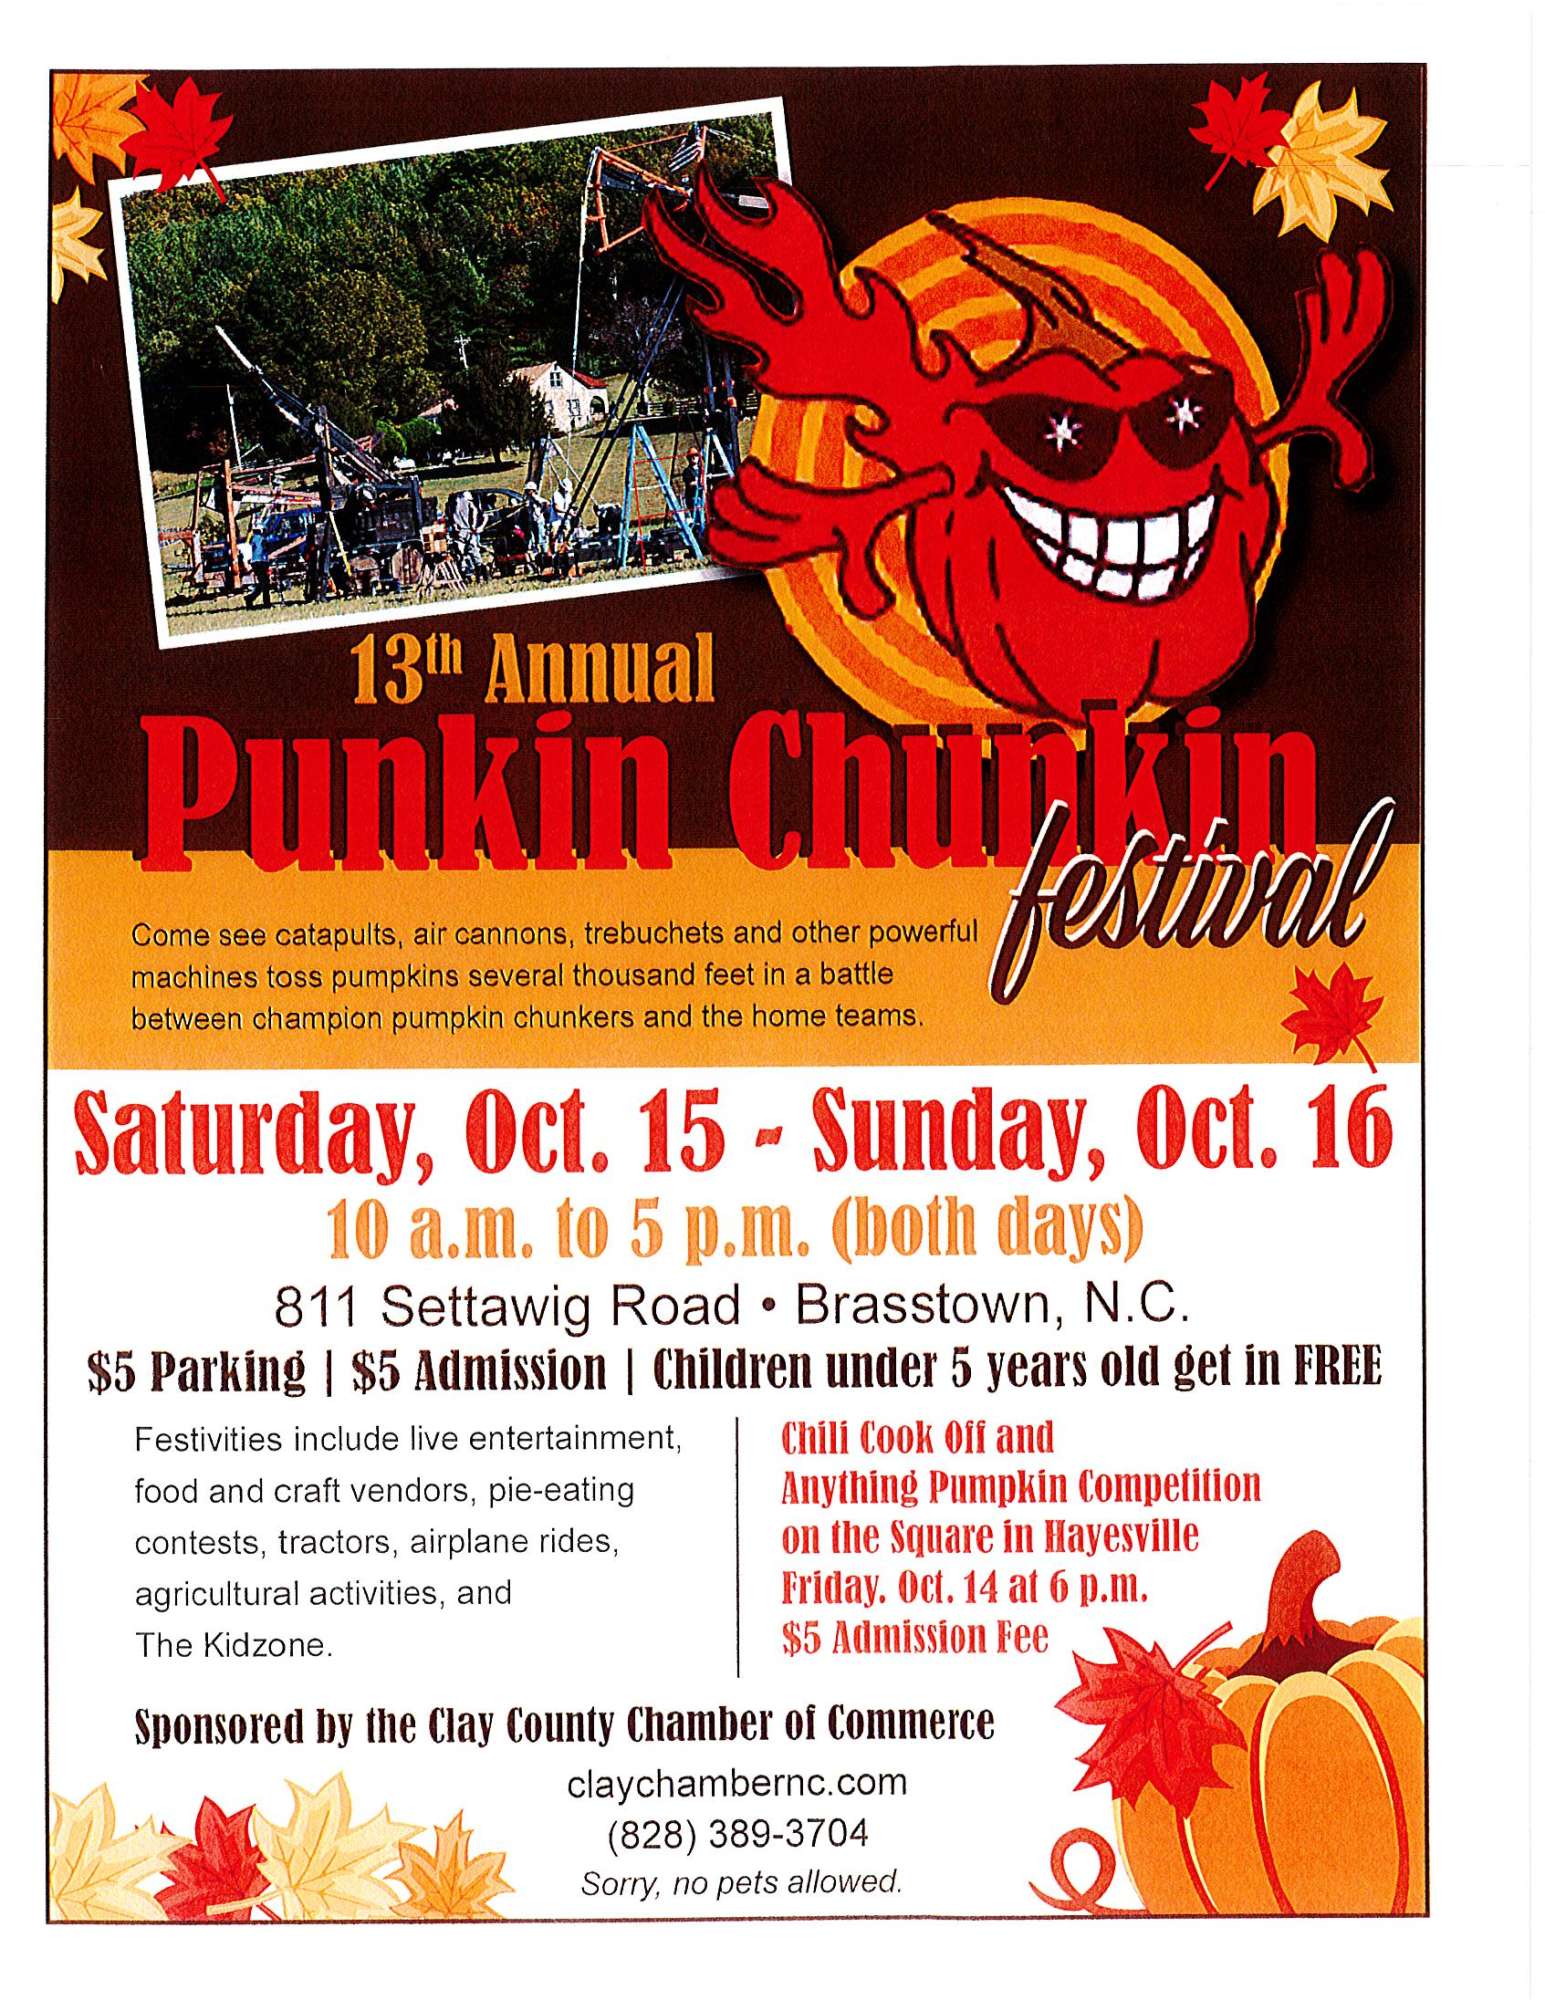 punkin-chunkin-festival-clay-county-chamber-of-commerce